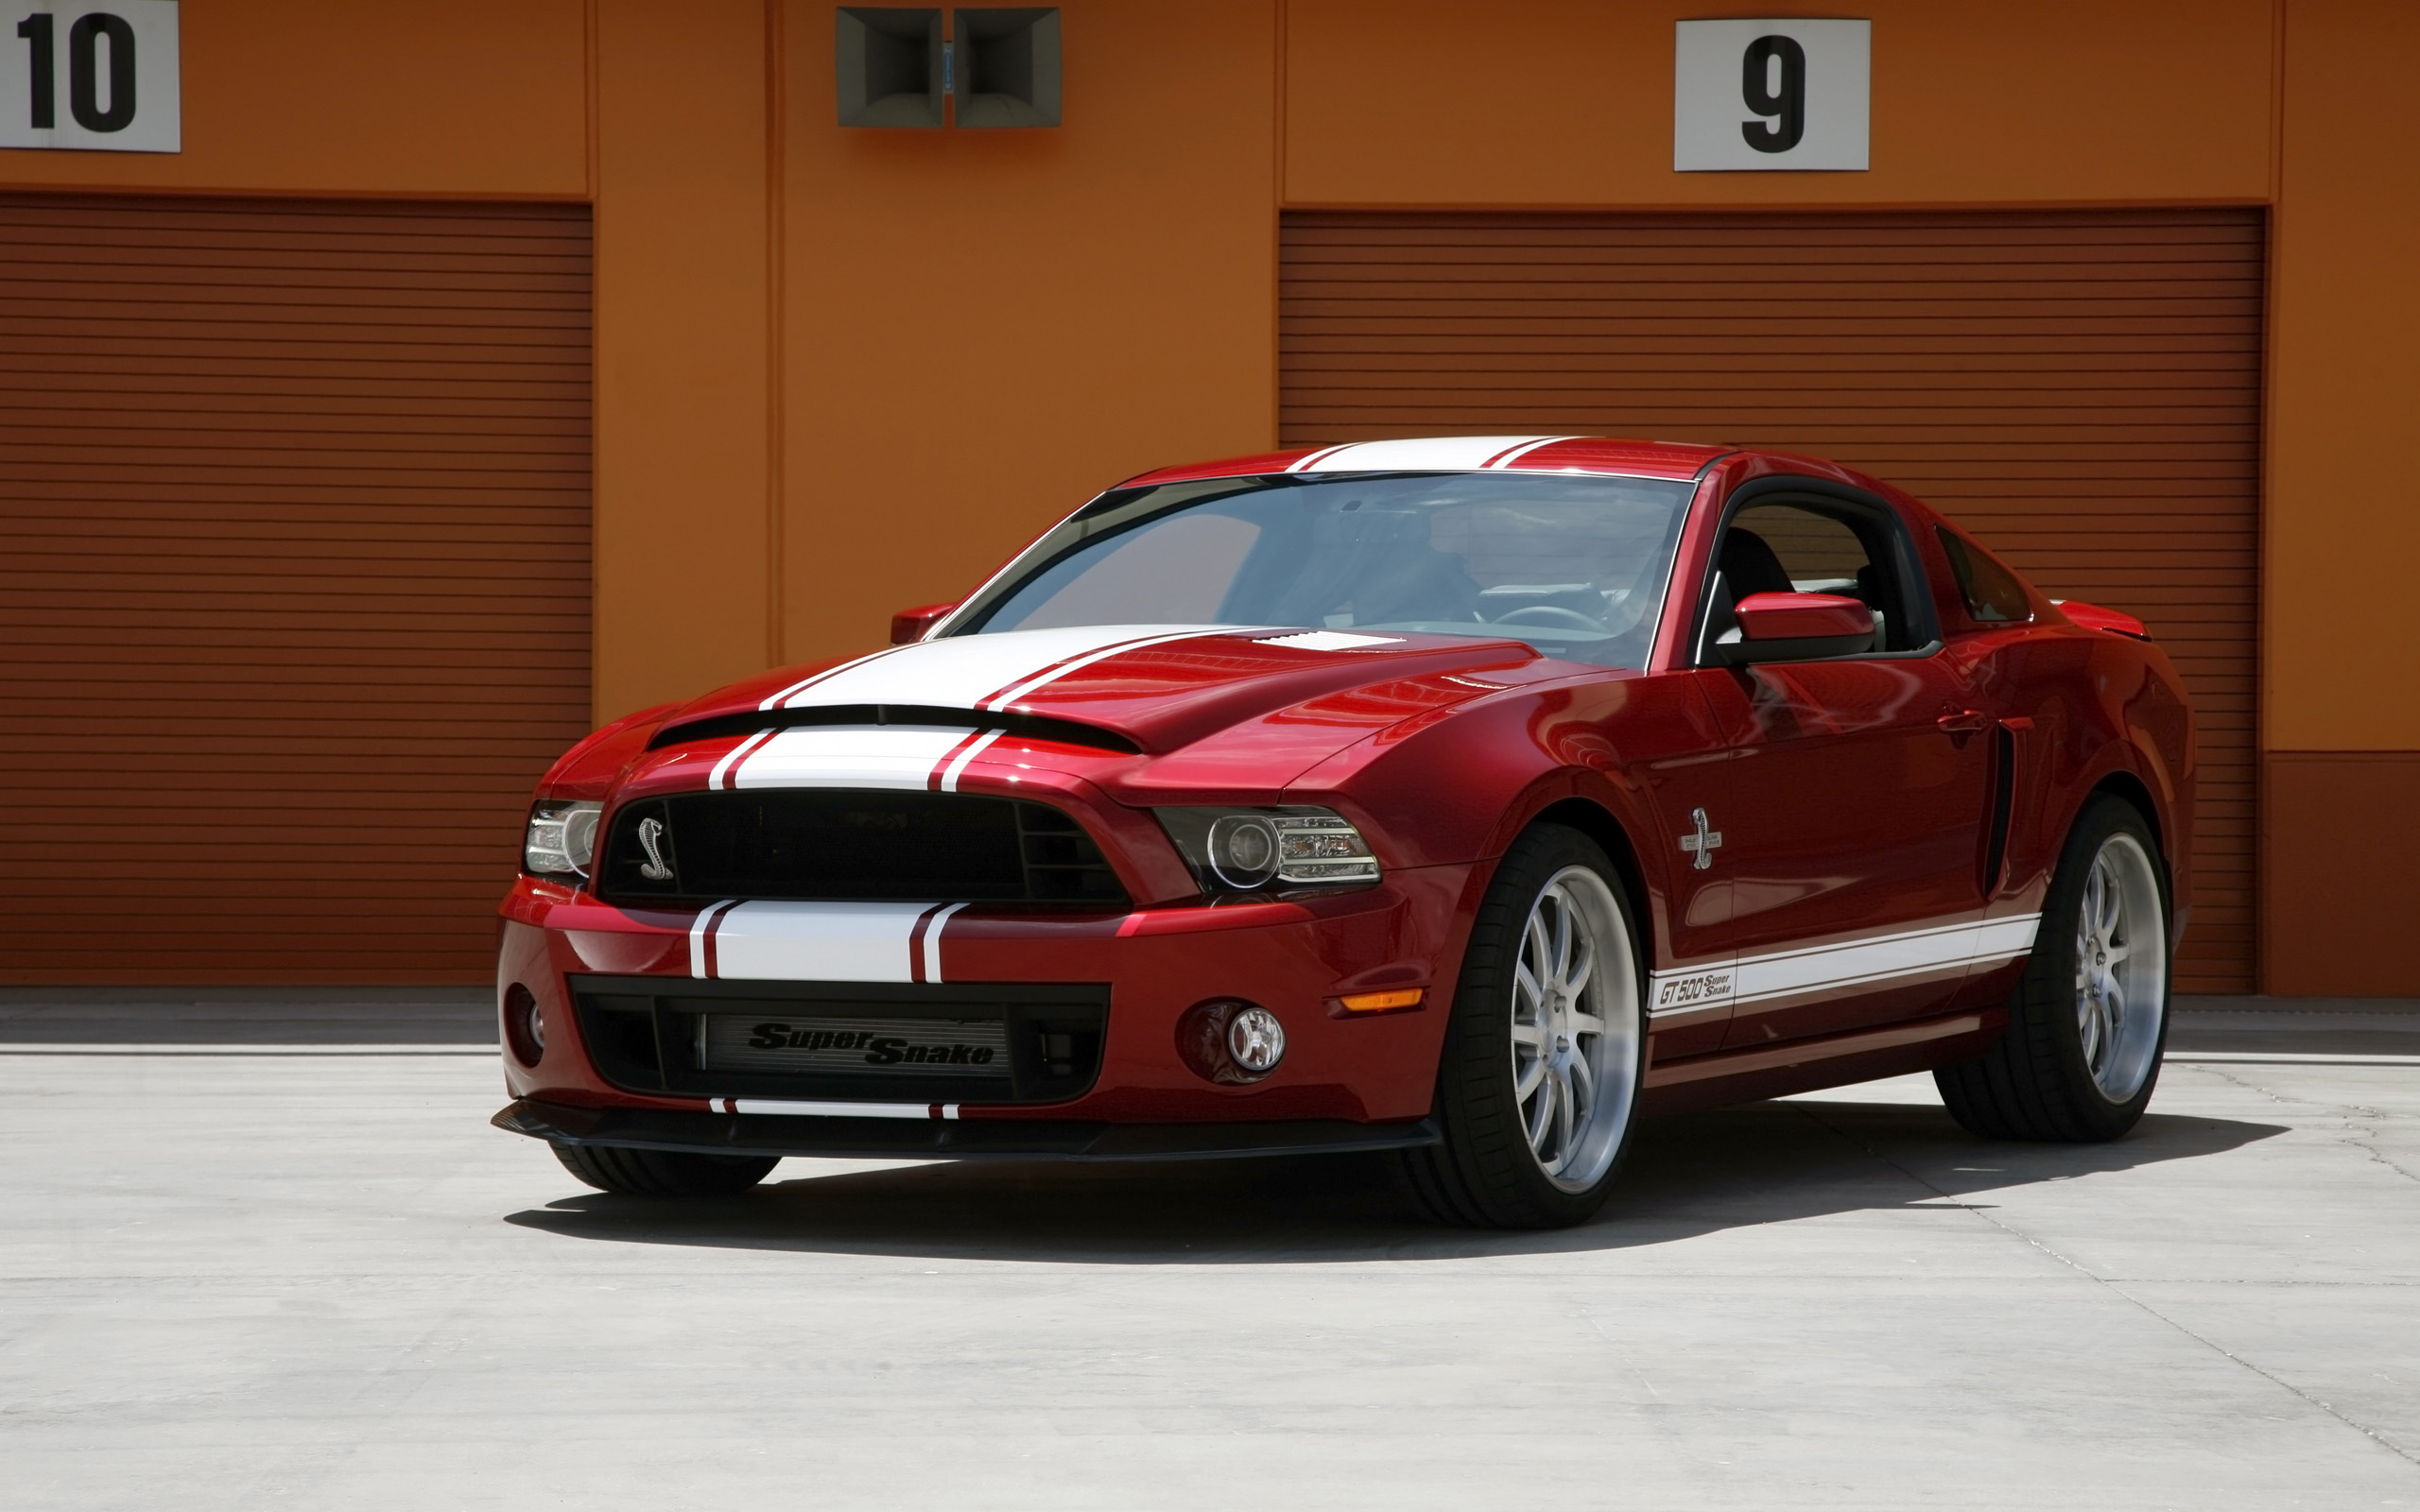 Ford Mustang Shelby GT500 Super Snake photo 131141